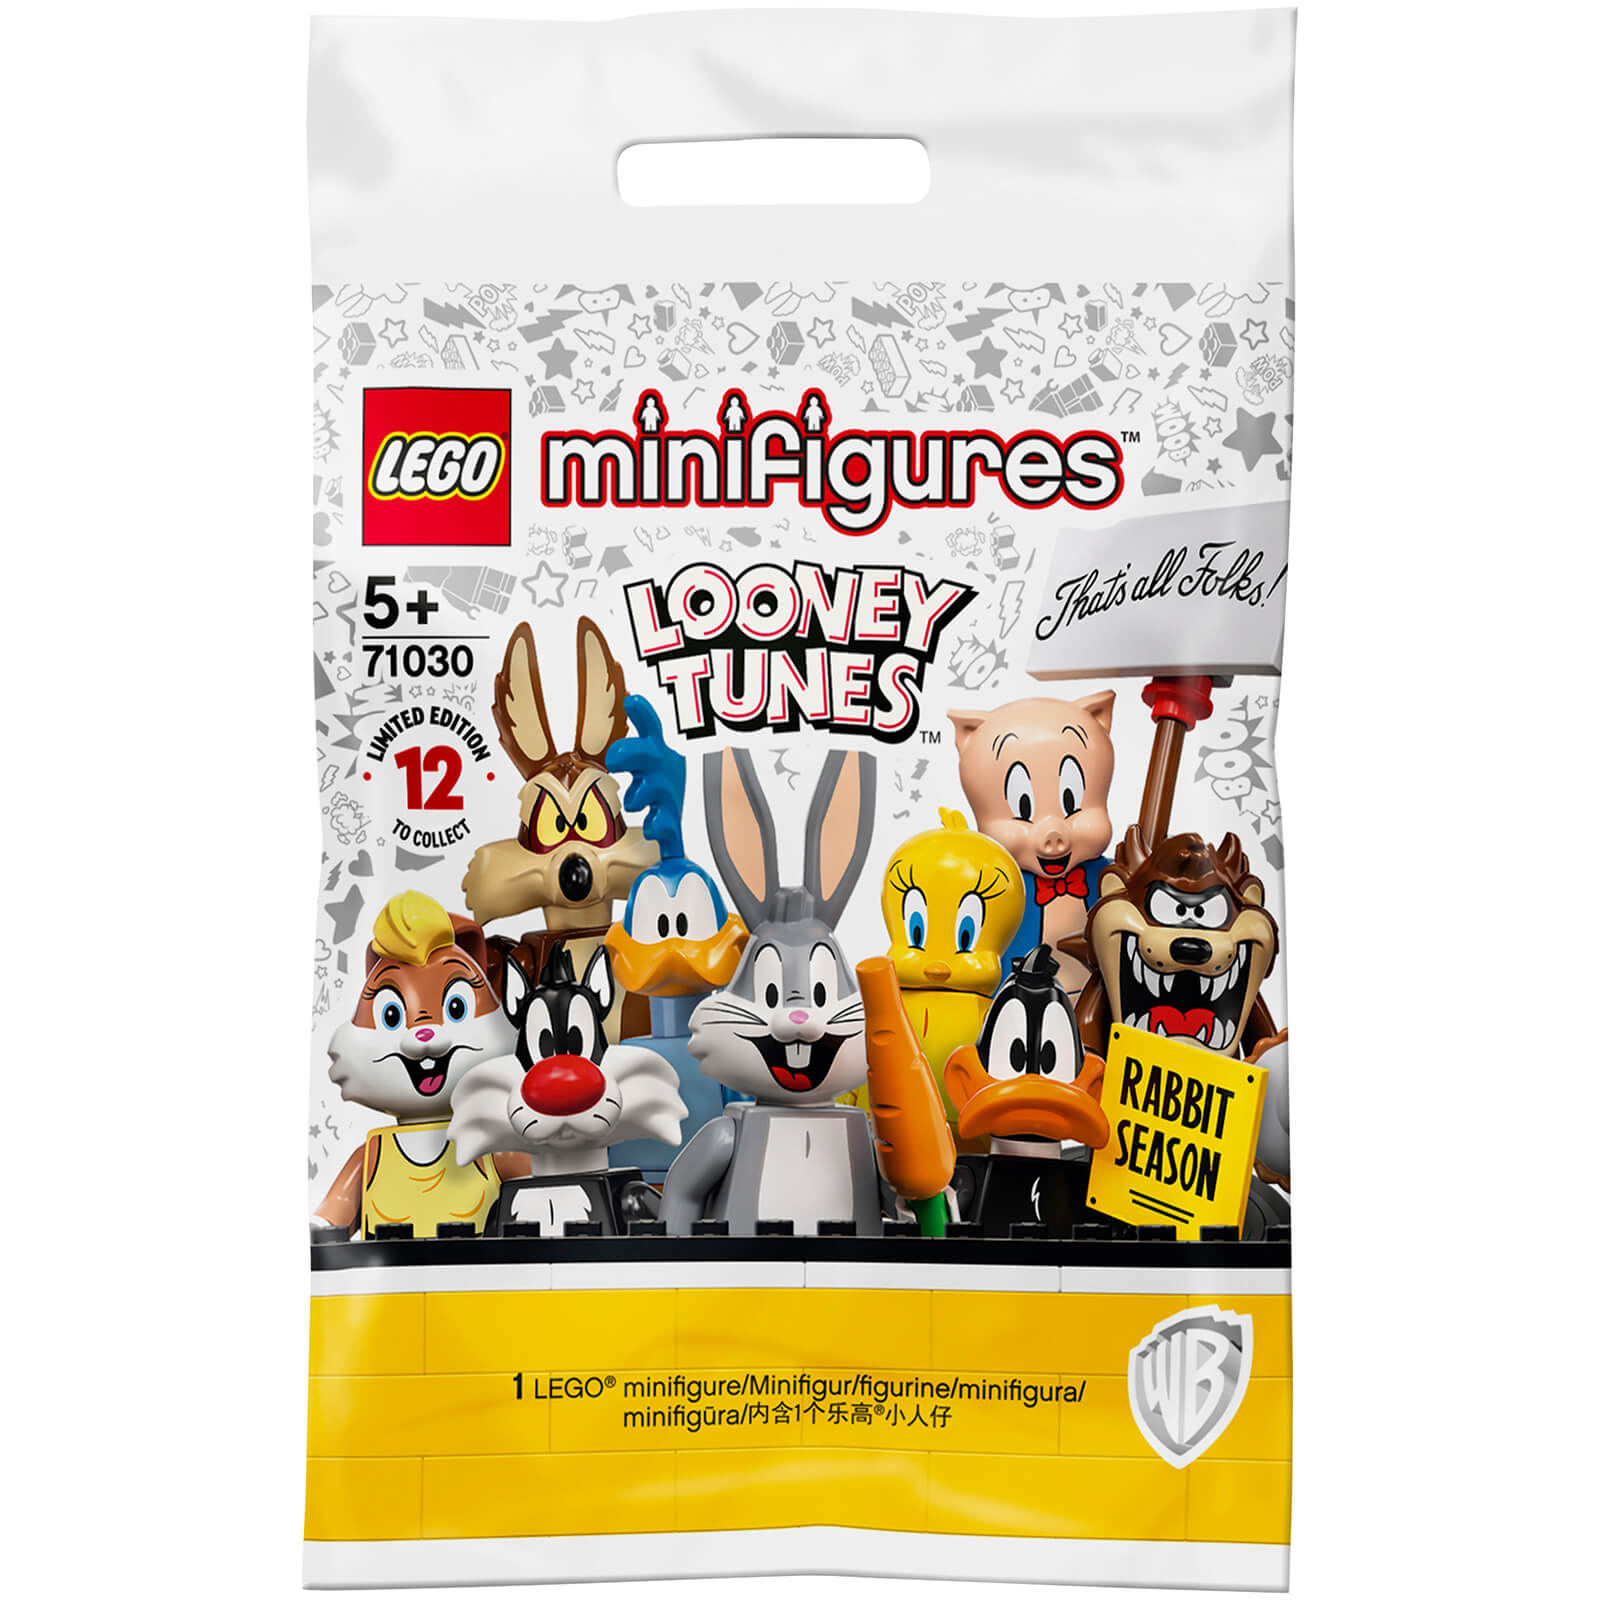 LEGO Minifigures: Looney Tunes Set Collection 1 of 12 (71030)